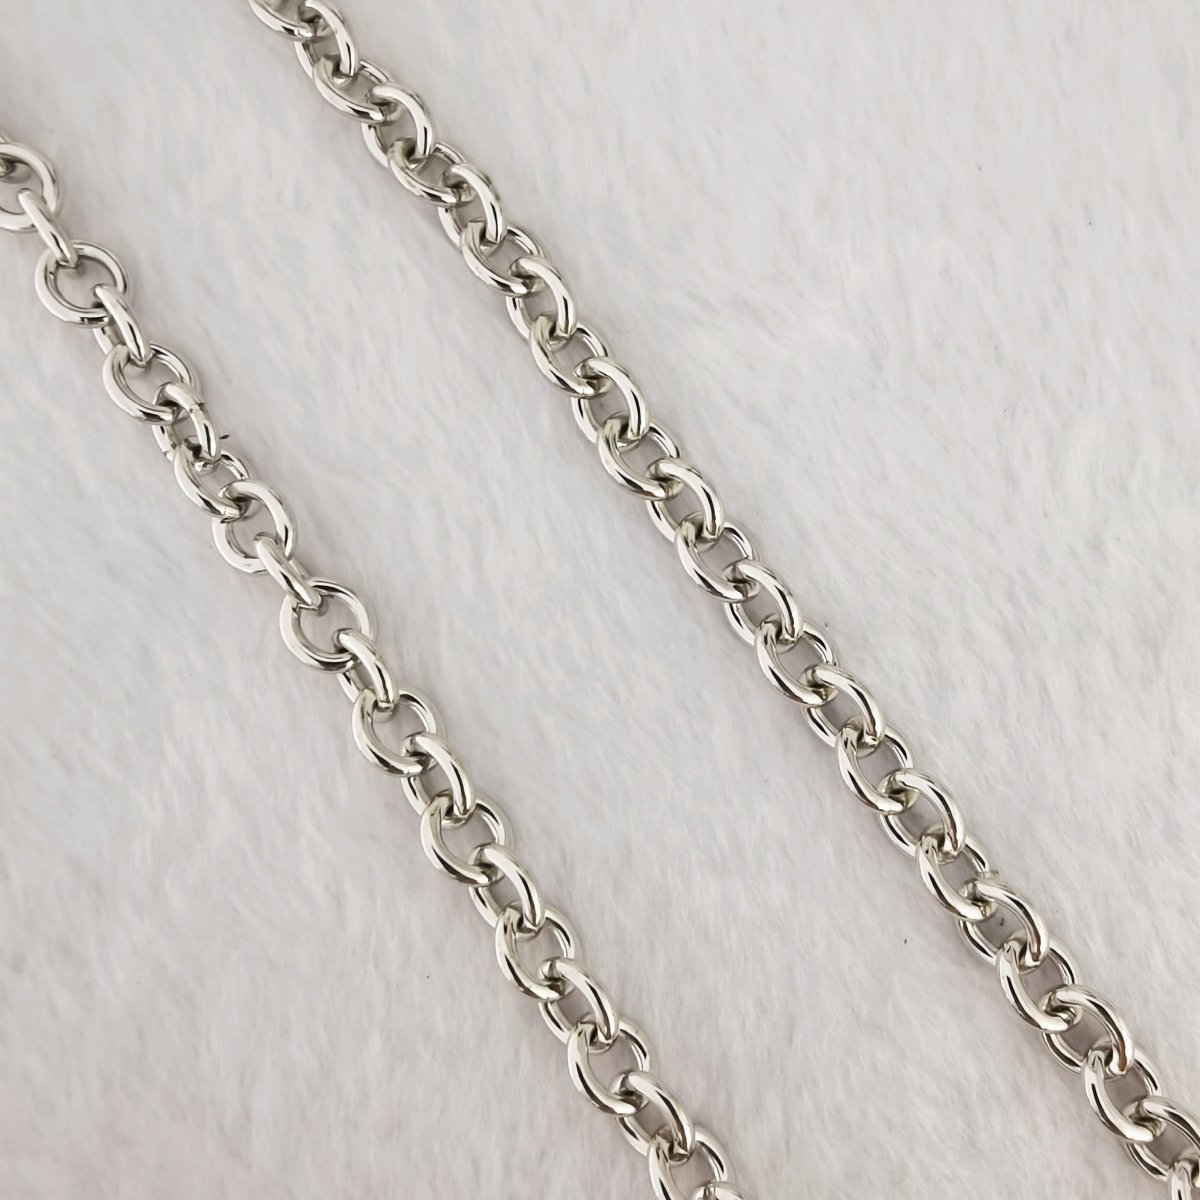 Silver, 18K Gold, 24K Gold Filled ROLO Chain Sold By Yard For Jewelry Making, Necklace Bracelet Anklet Component Supply | ROLL-473(XP-001), ROLL-476(XP-005), ROLL-477(XP-004) Clearance Pricing - DLUXCA